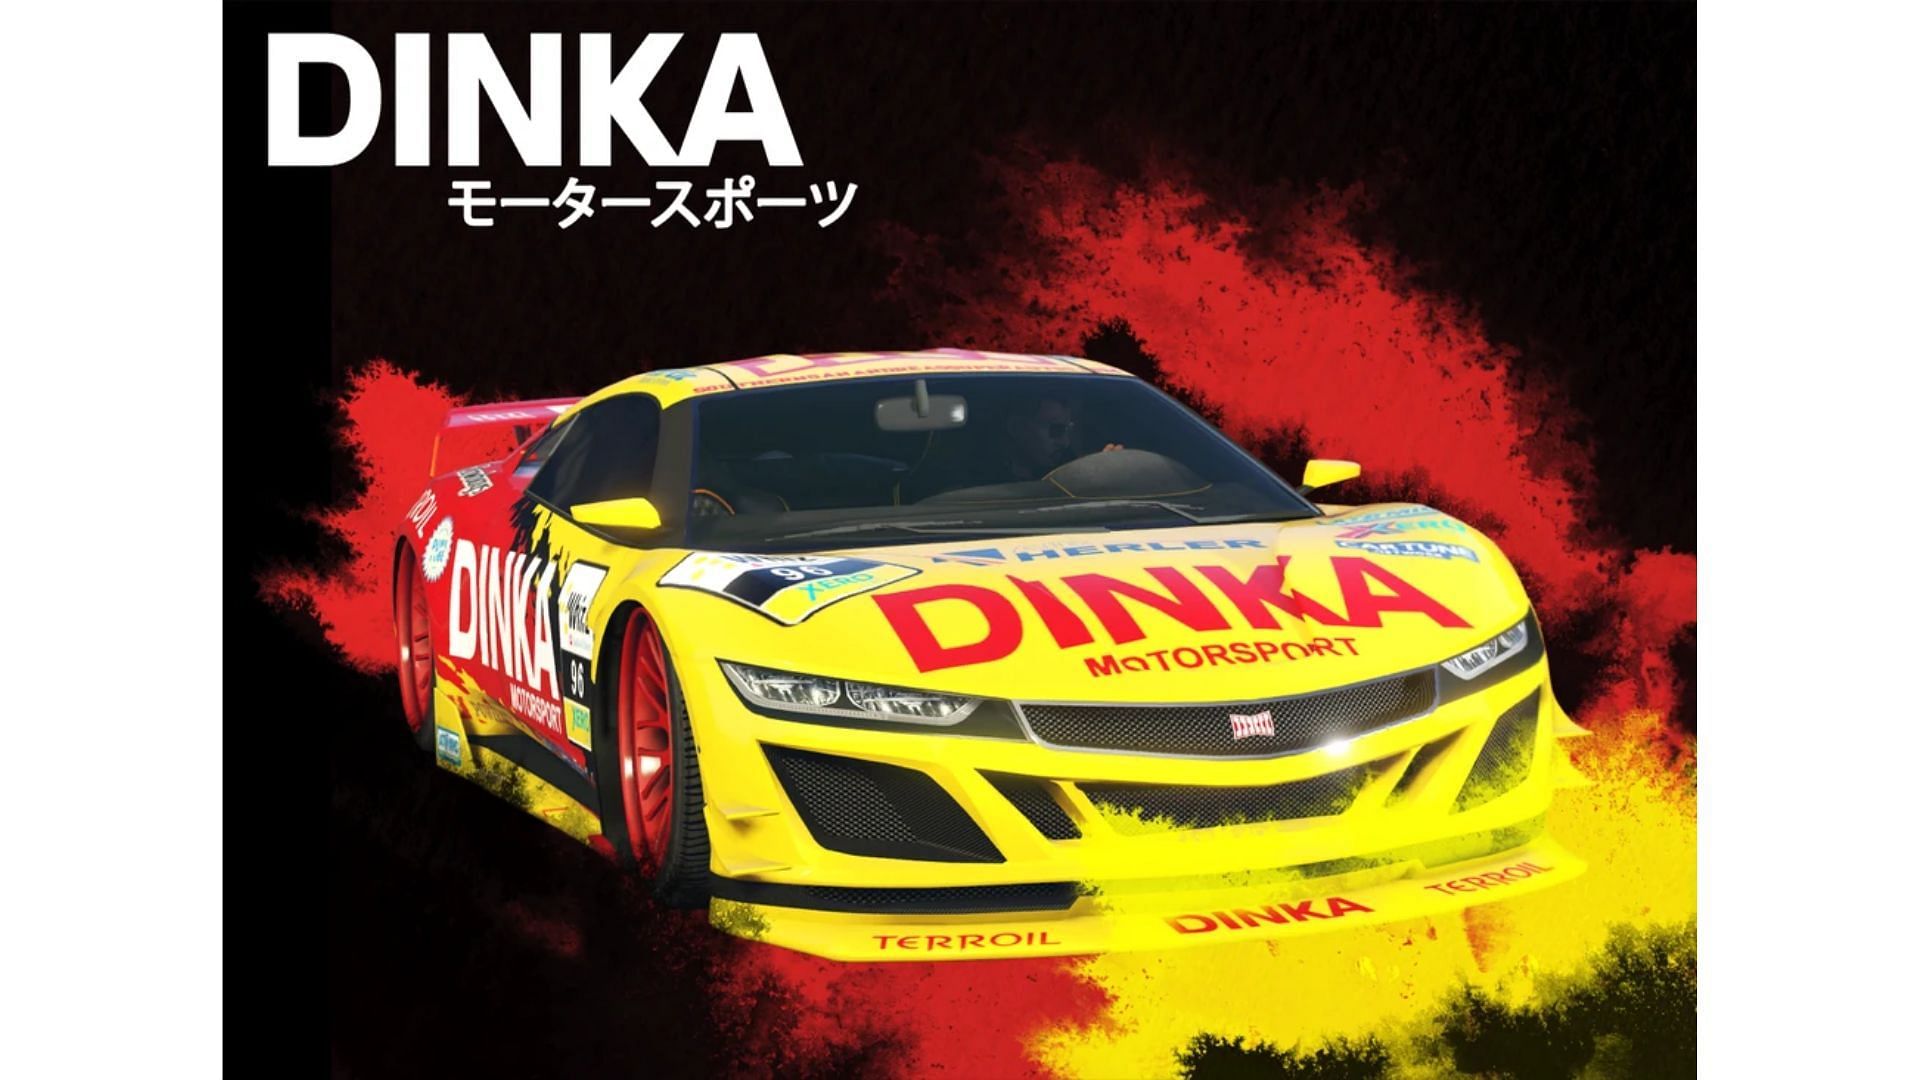 An official promotional image of the Dinka brand (Image via Rockstar Games)